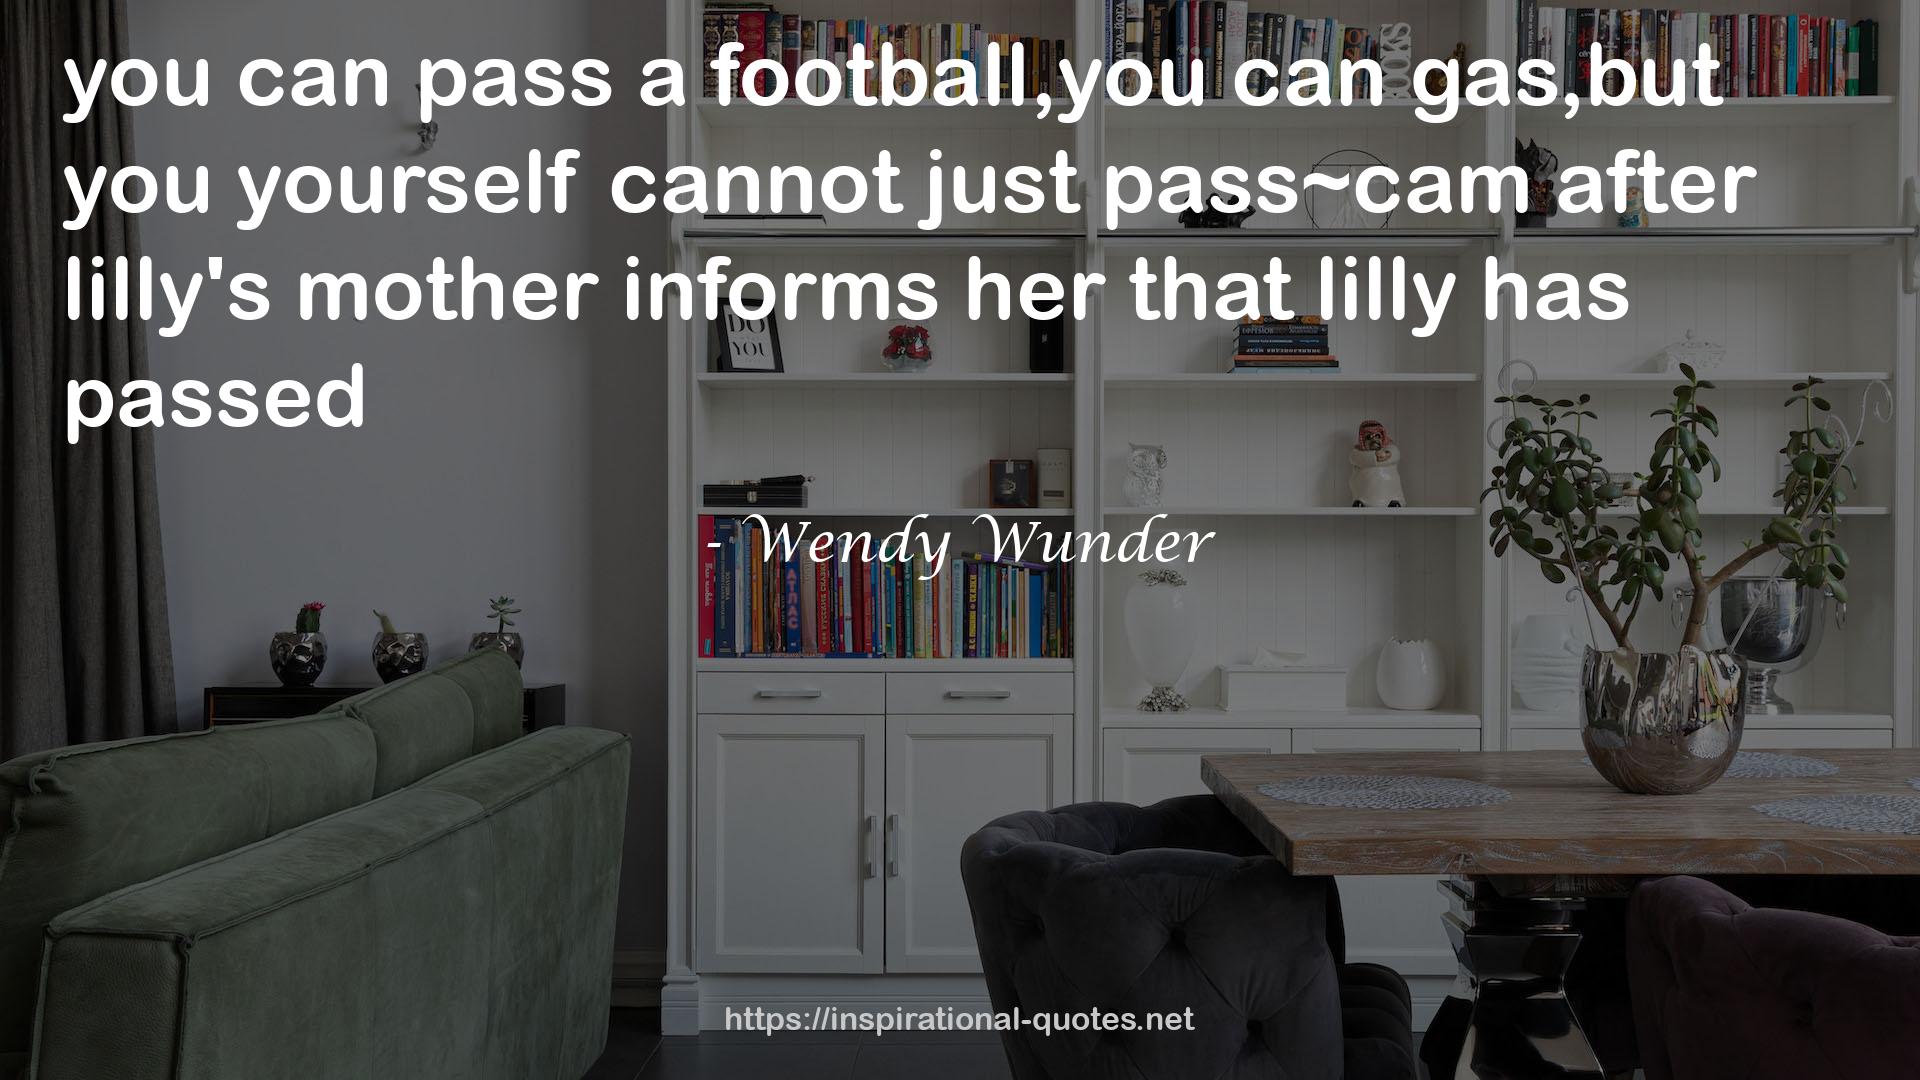 Wendy Wunder QUOTES